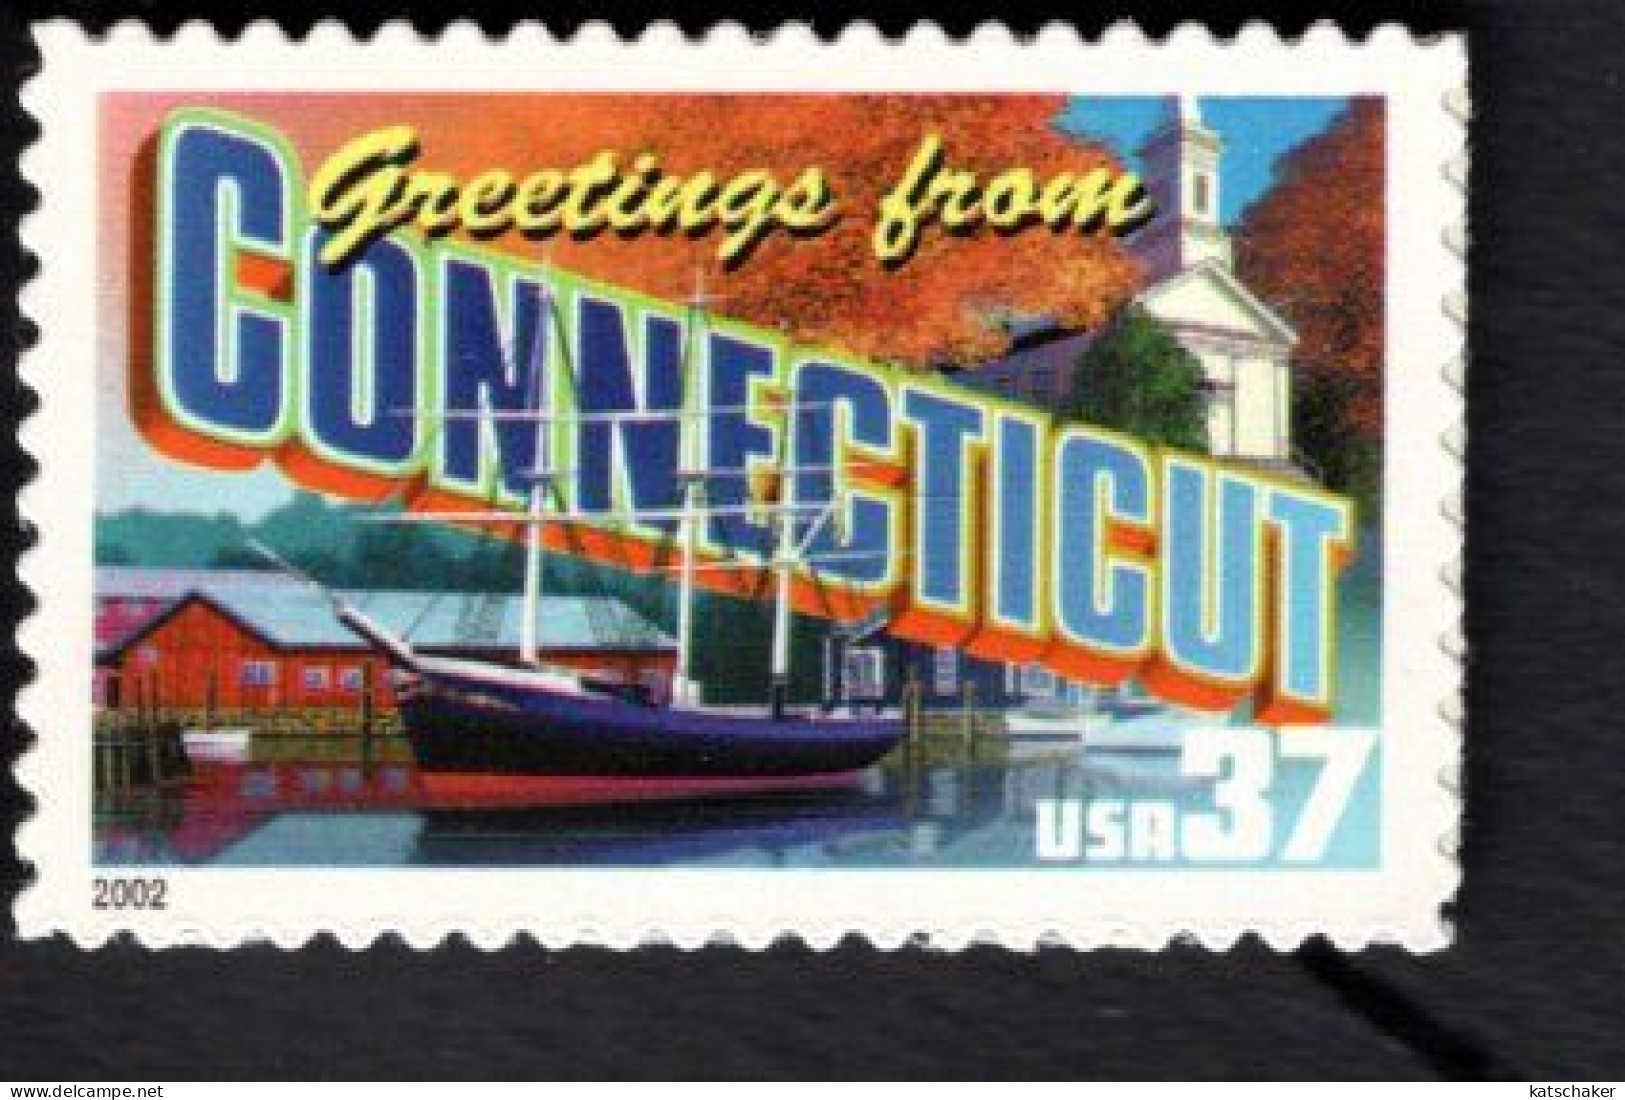 2017228952  2002  SCOTT 3702 (XX) POSTFRIS MINT NEVER HINGED - GREETINGS FROM AMERICA - CONNECTICUT - Unused Stamps